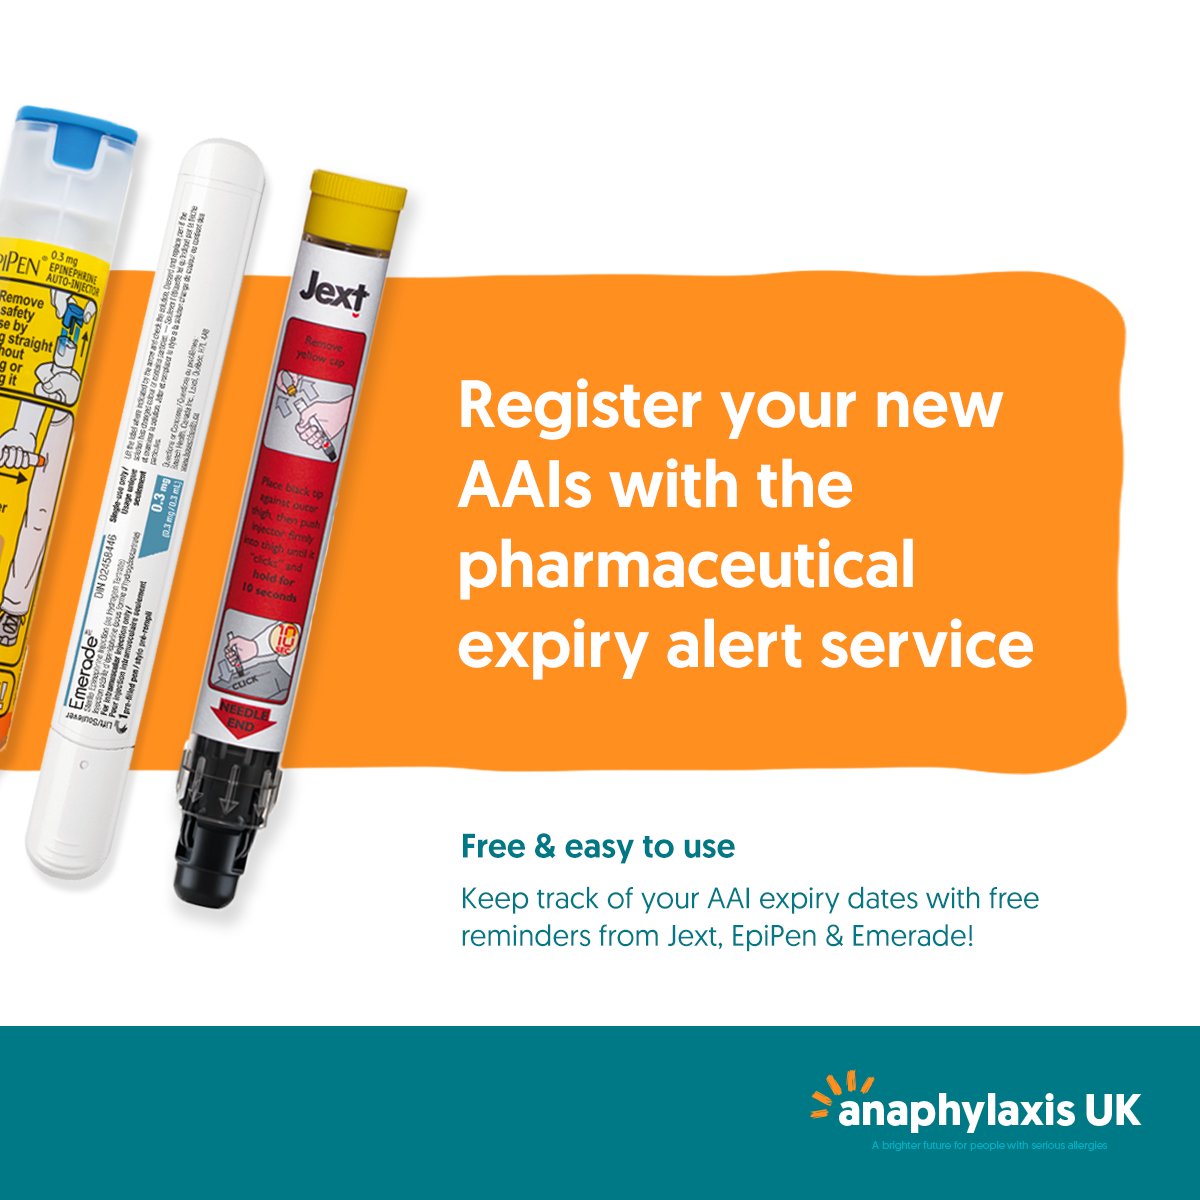 Register your new AAIs with the pharmaceutical expiry alert service. It's free and easy to use! EpiPen: epipen.co.uk/en-gb/patients… Emerade: emerade-bausch.co.uk/patient Jext: adults.jext.co.uk